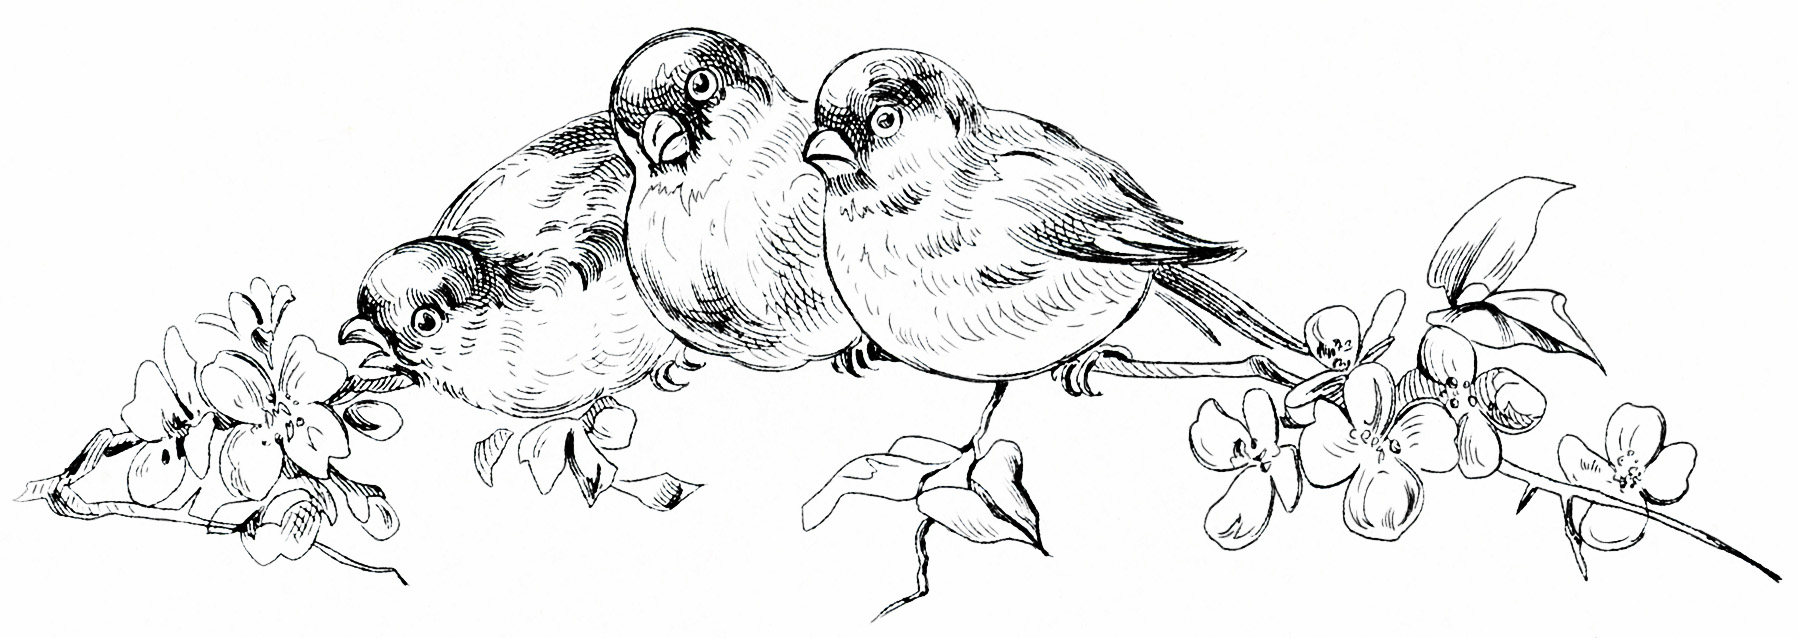 Here Is A Vintage Sketch Of A Group Of Three Adorable Birds Perched On